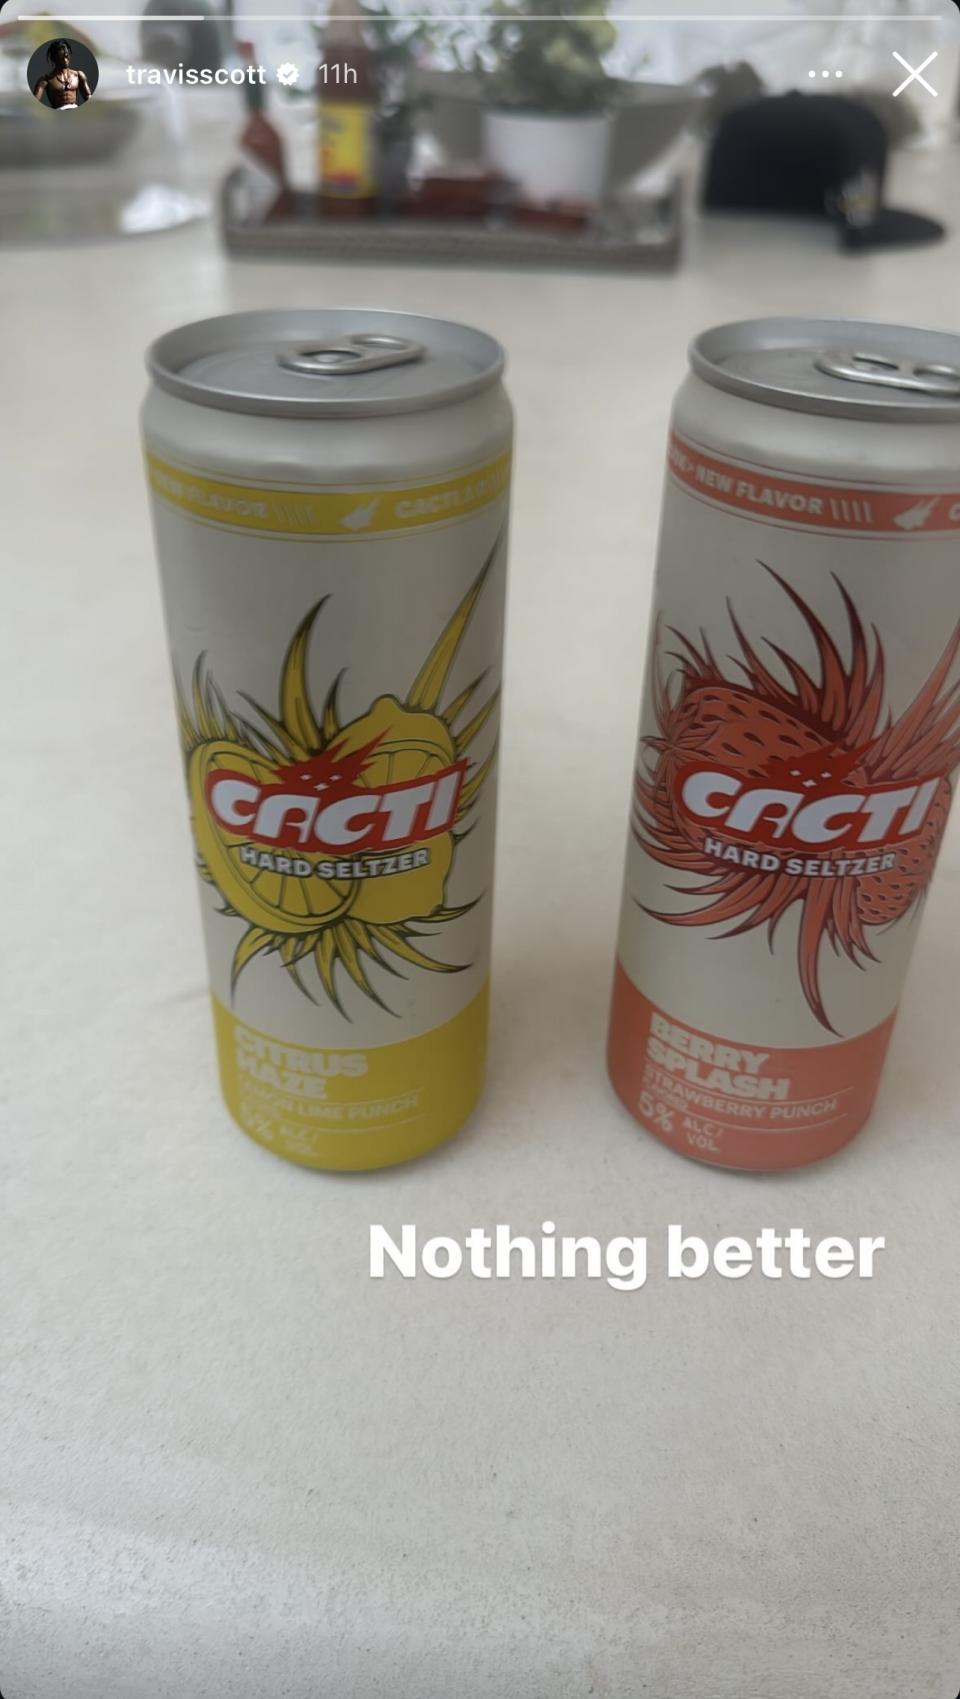 Two cans of 'Cacti' hard seltzer on a table with text "Nothing better"